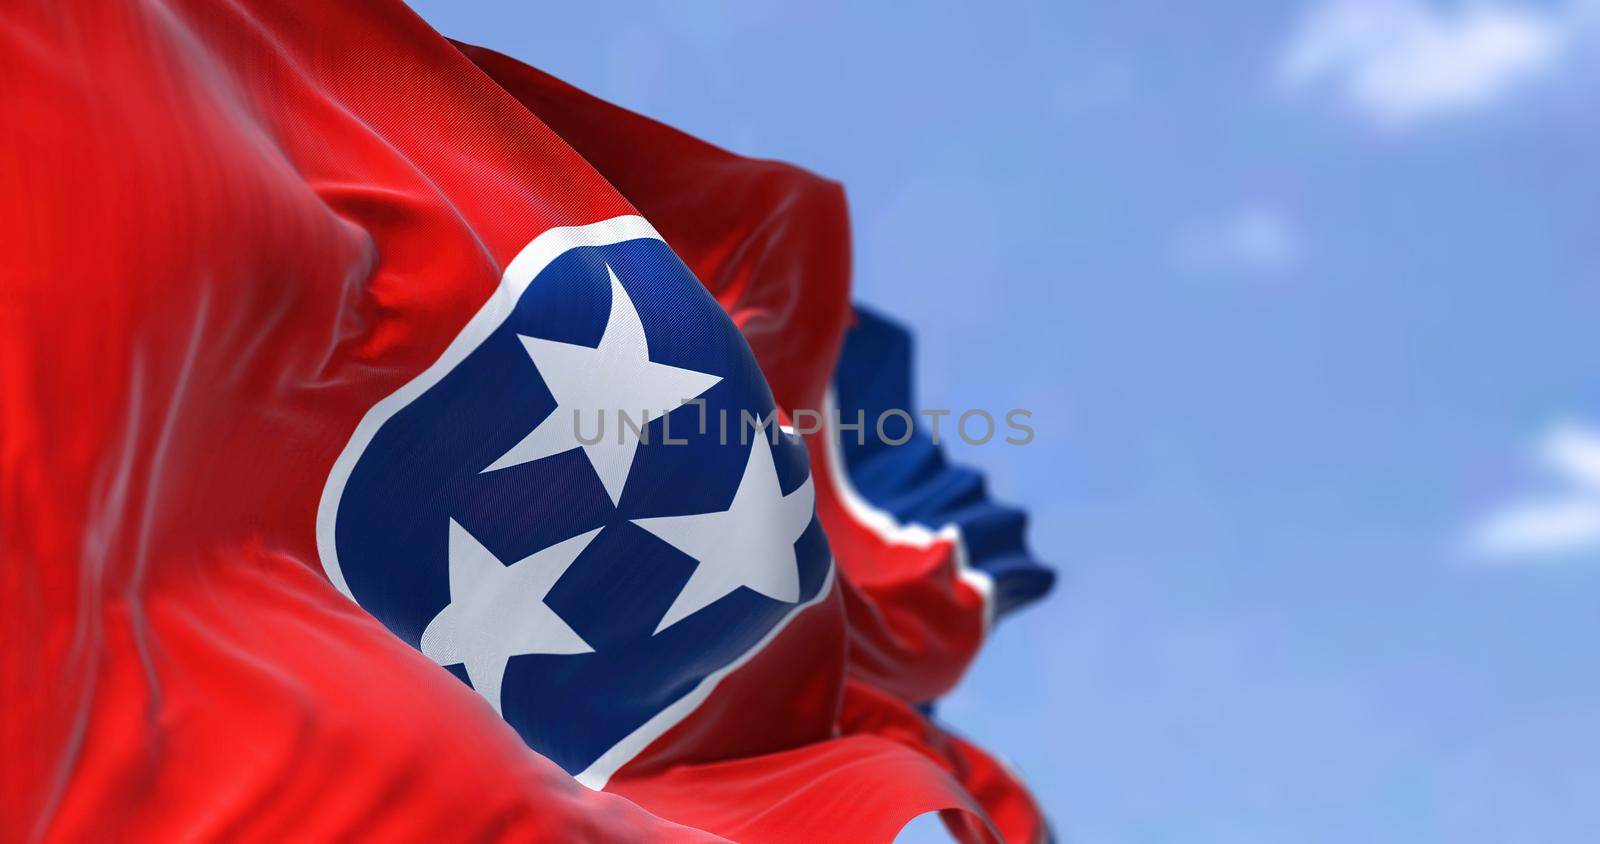 The US state flag of Tennessee waving in the wind. Tennessee is a state in the Southeastern region of the United States. Democracy and independence.